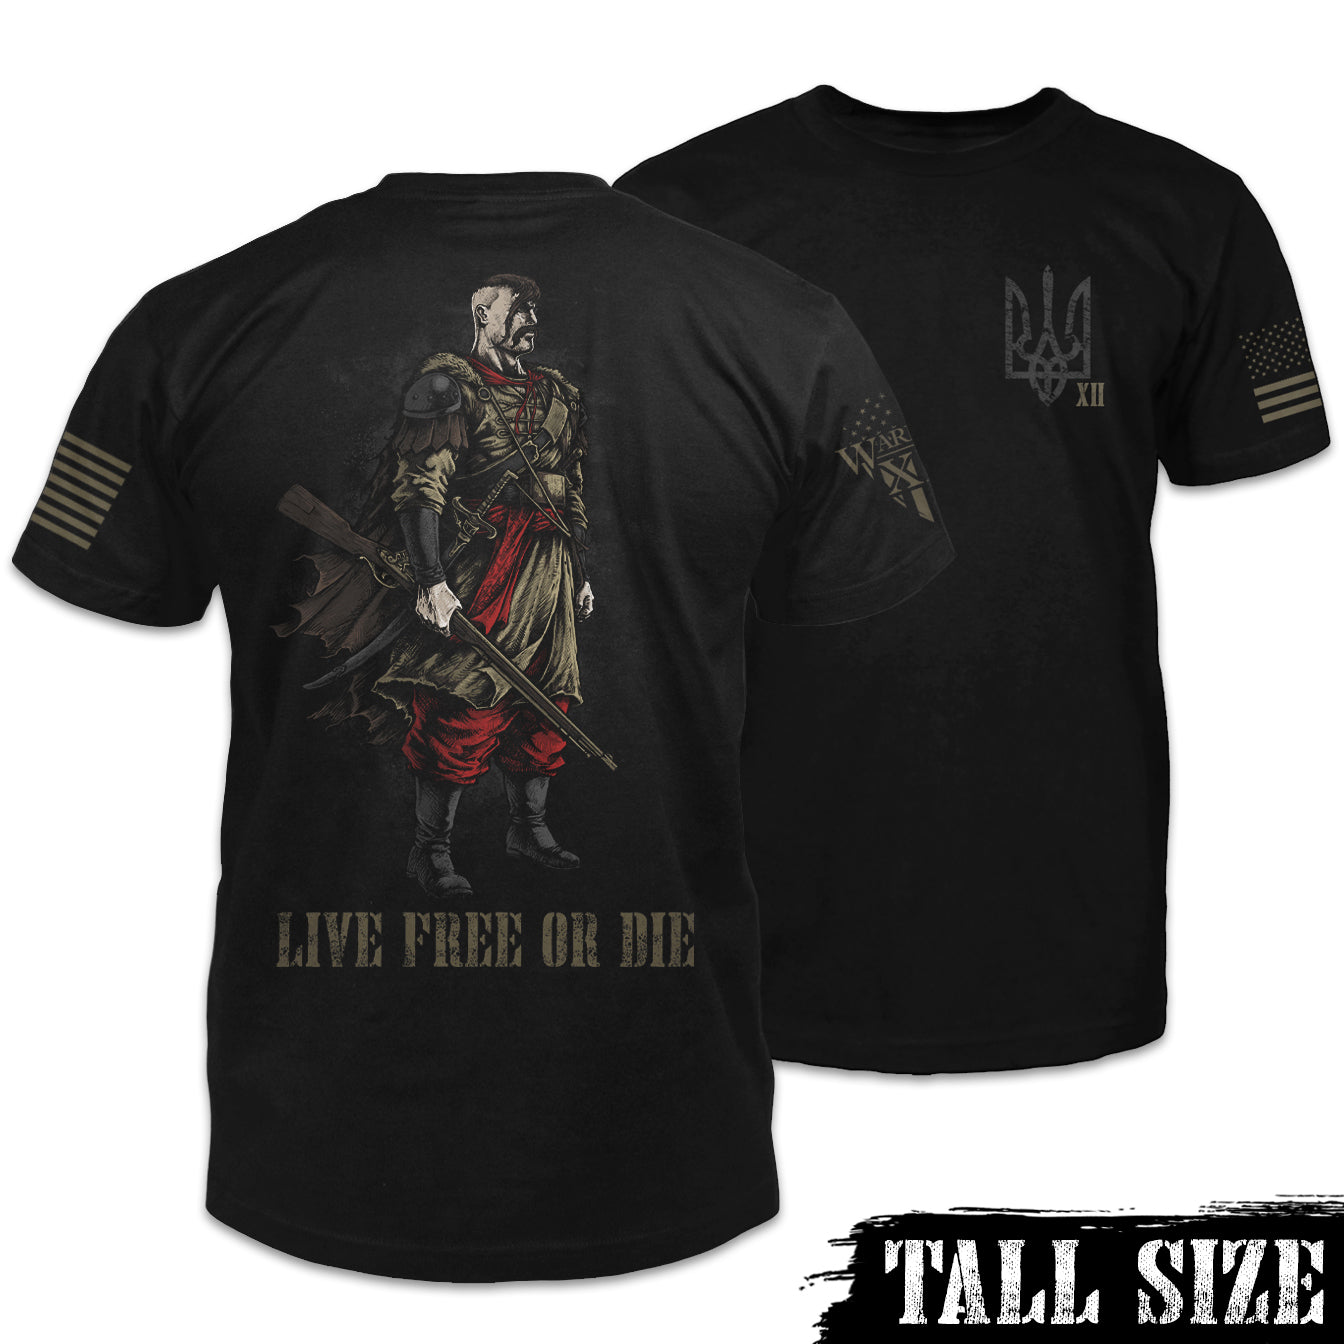 Front & back black tall sized shirt with a cossack warrior with the words "live free or die" printed on the back of the shirt.